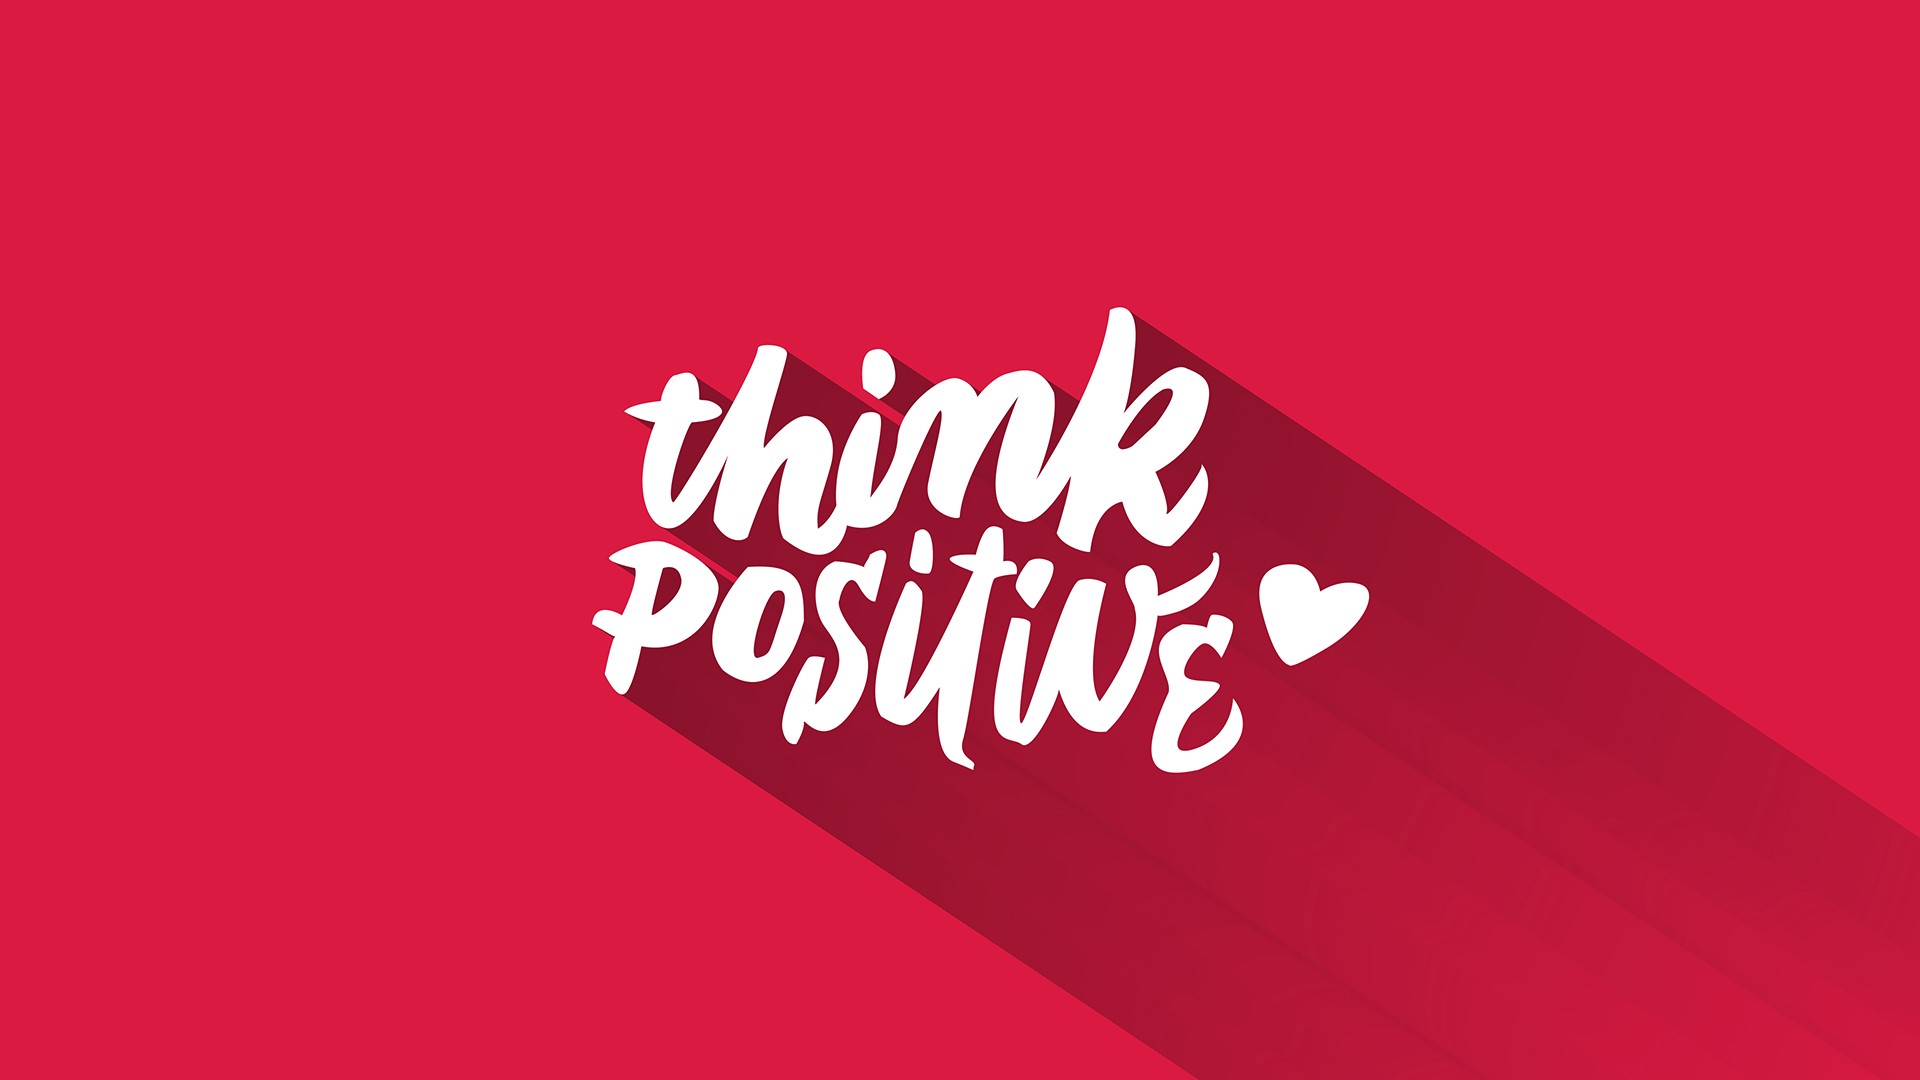 General 1920x1080 typo quote positive pink heart typography motivational digital art red background red simple background